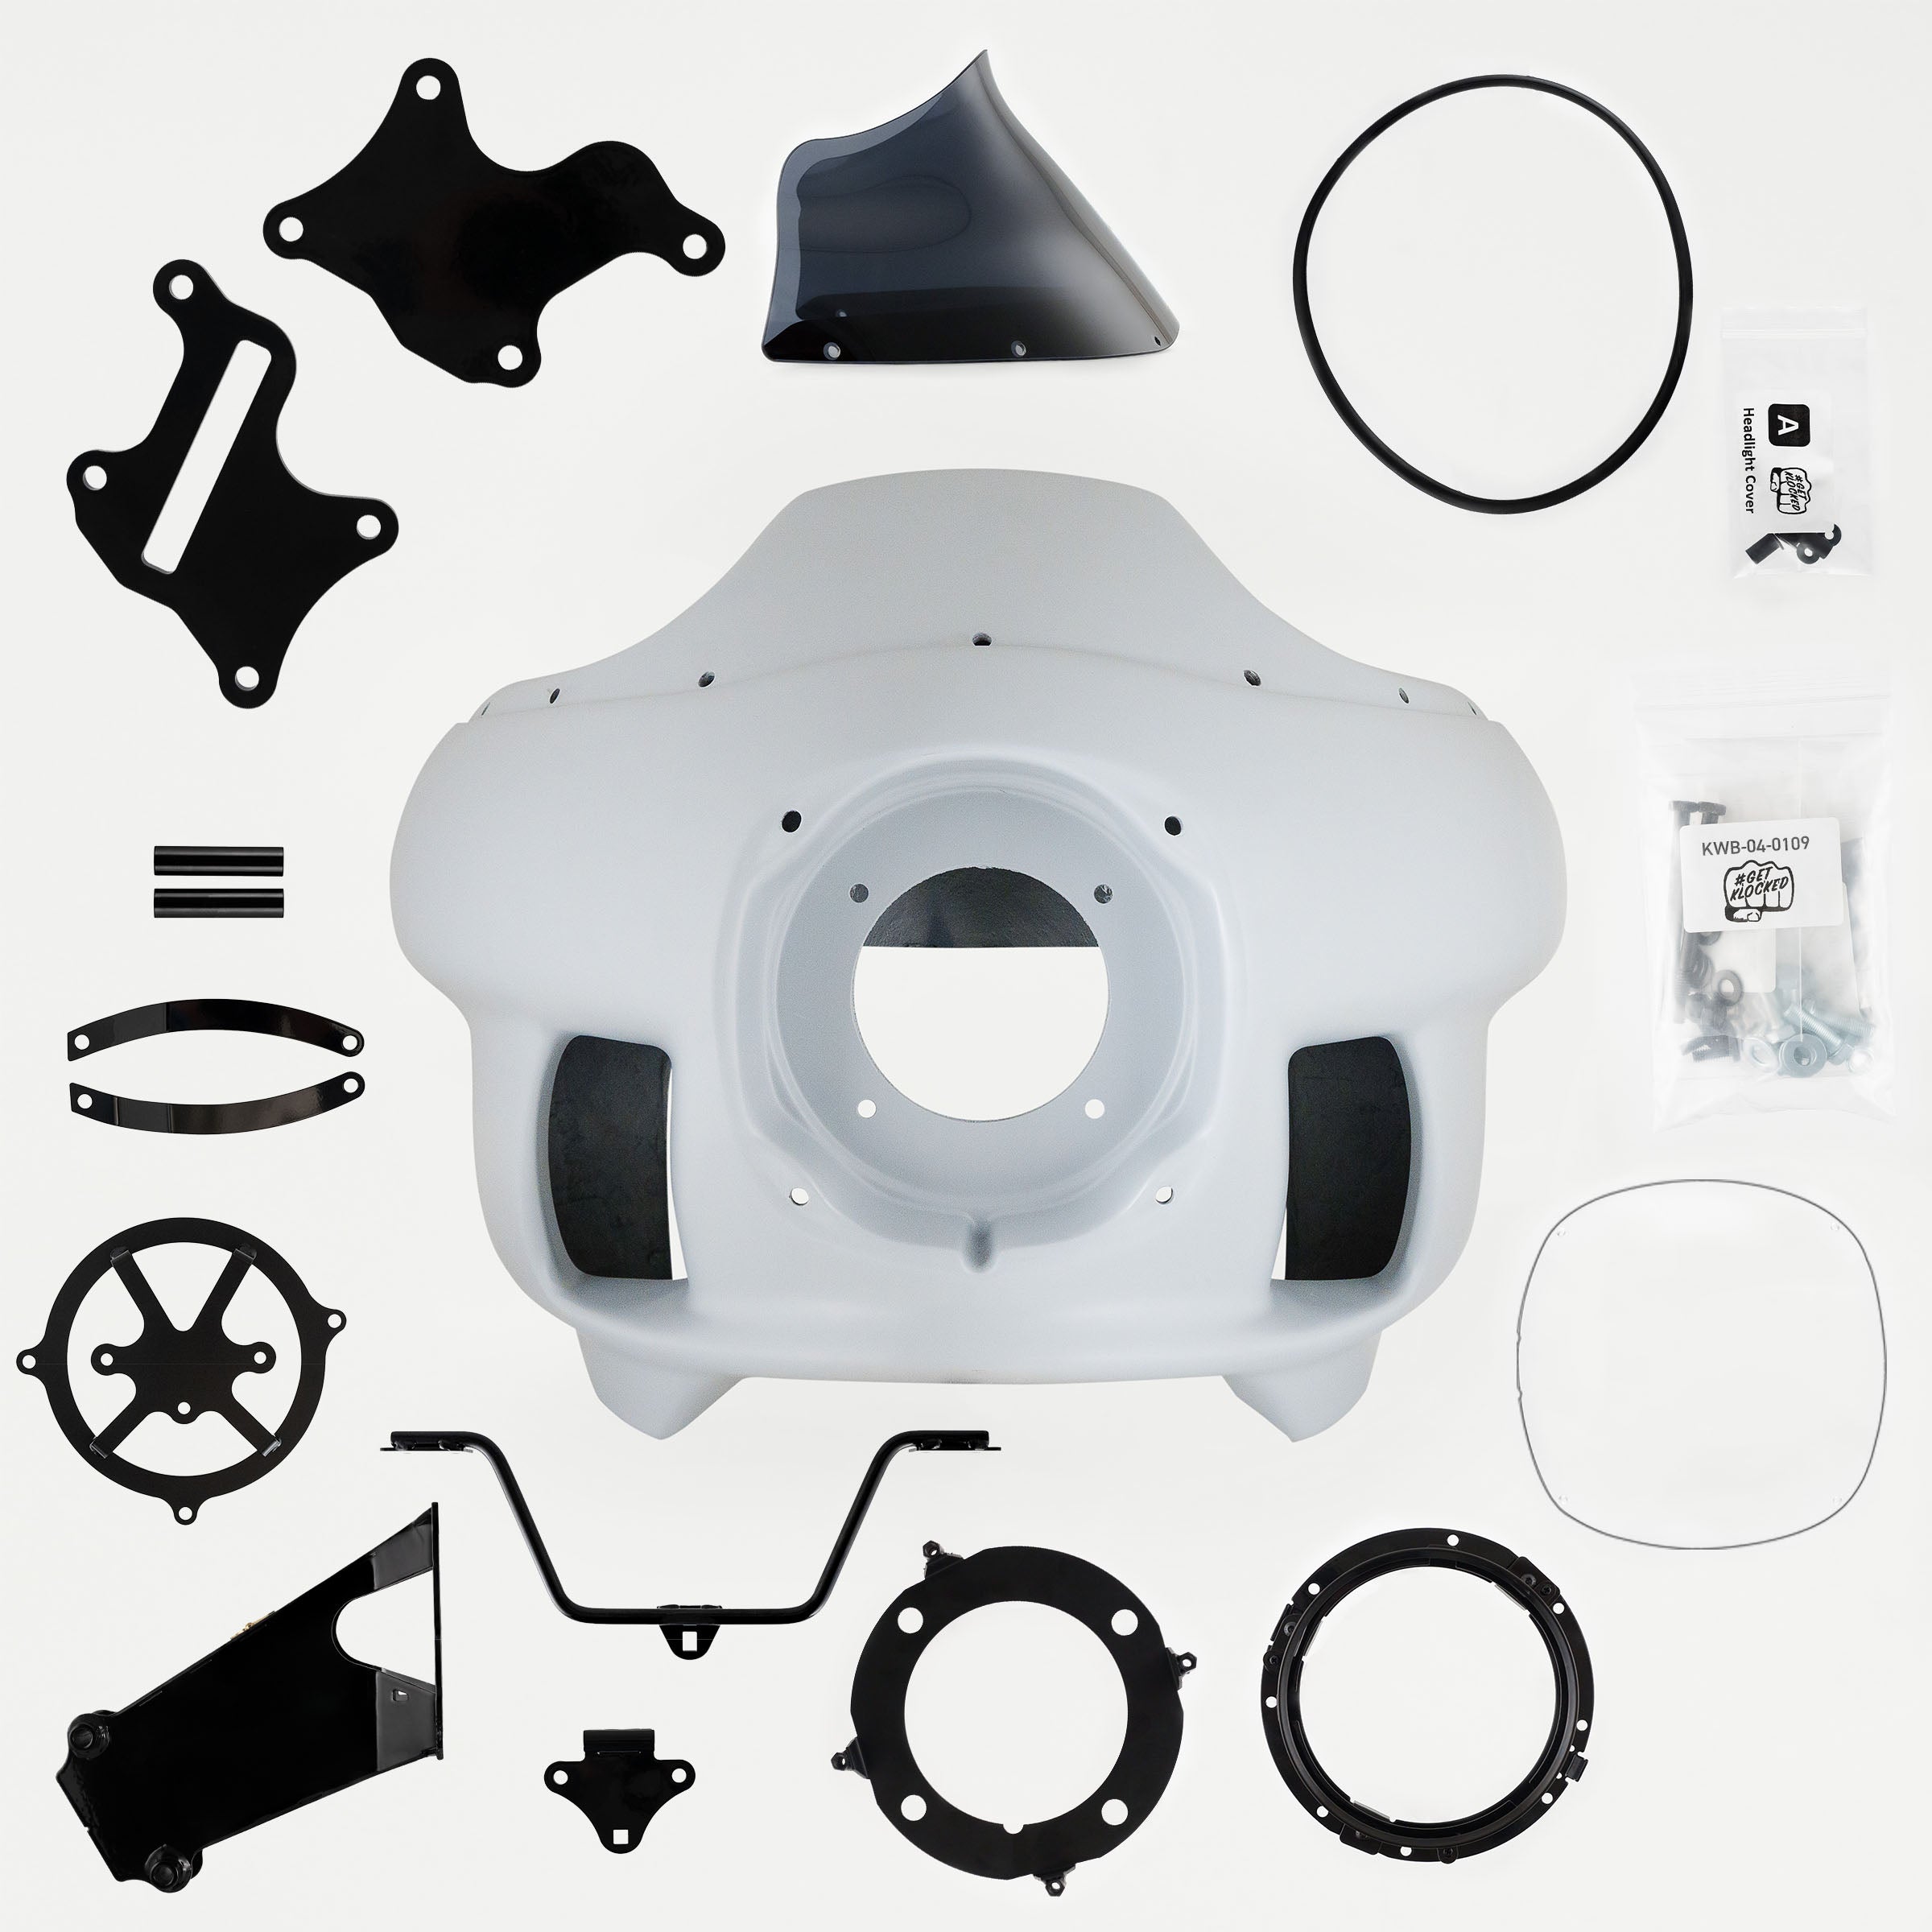 Complete Fit Kit of FXRP Fairing Fit Kit for 2022, 2023 and 2024 Indian Chief Motorcycles (Complete Fit Kit for 2022+ Indian Chief)